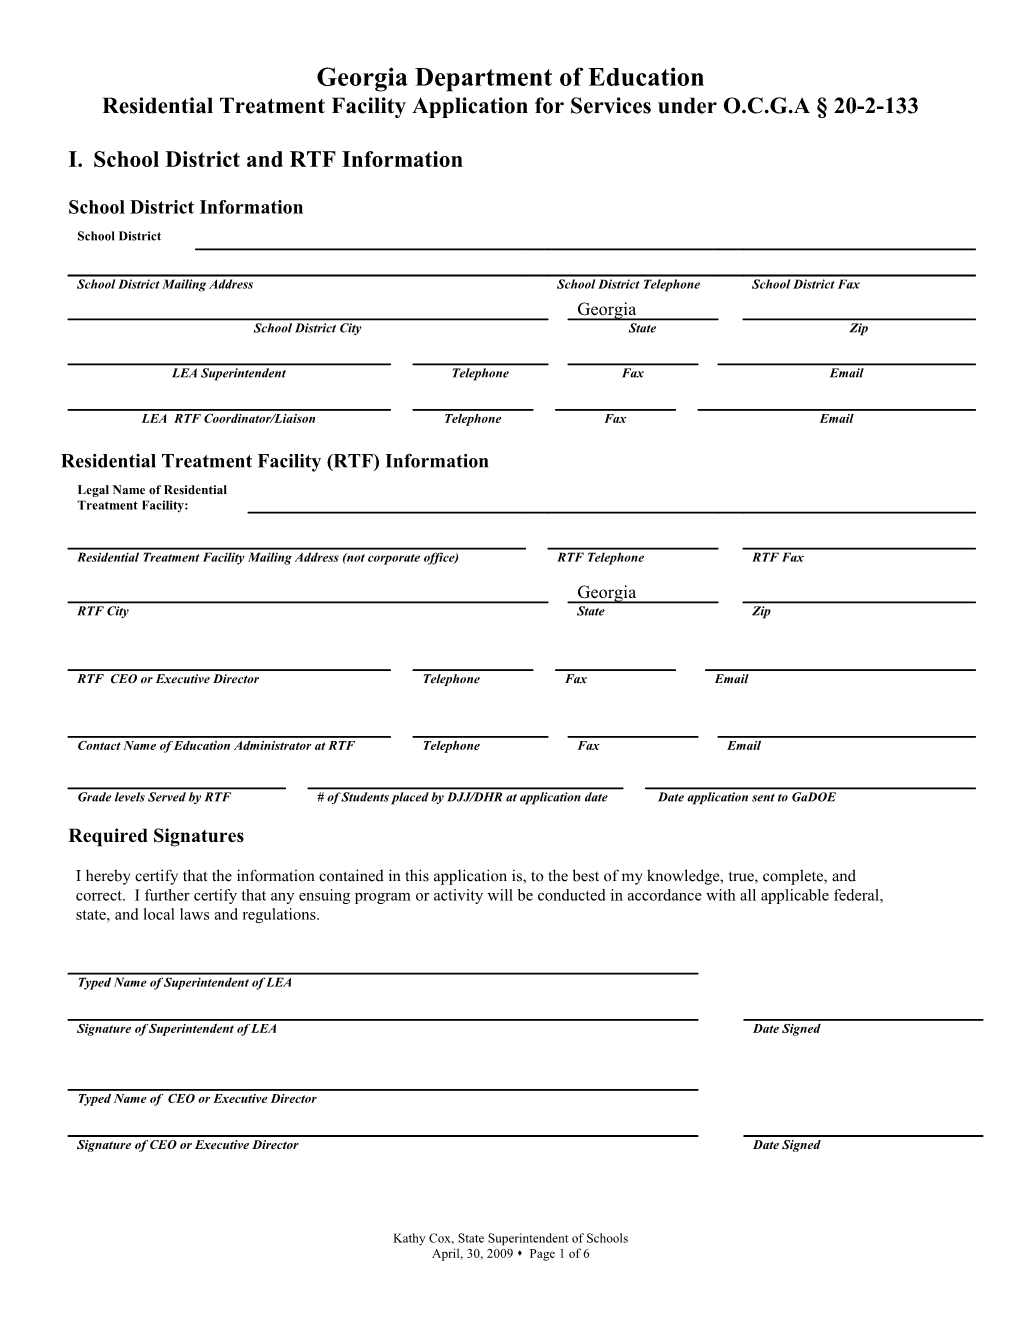 Residential Treatment Facility Application for Services Under O.C.G.A 20-2-133